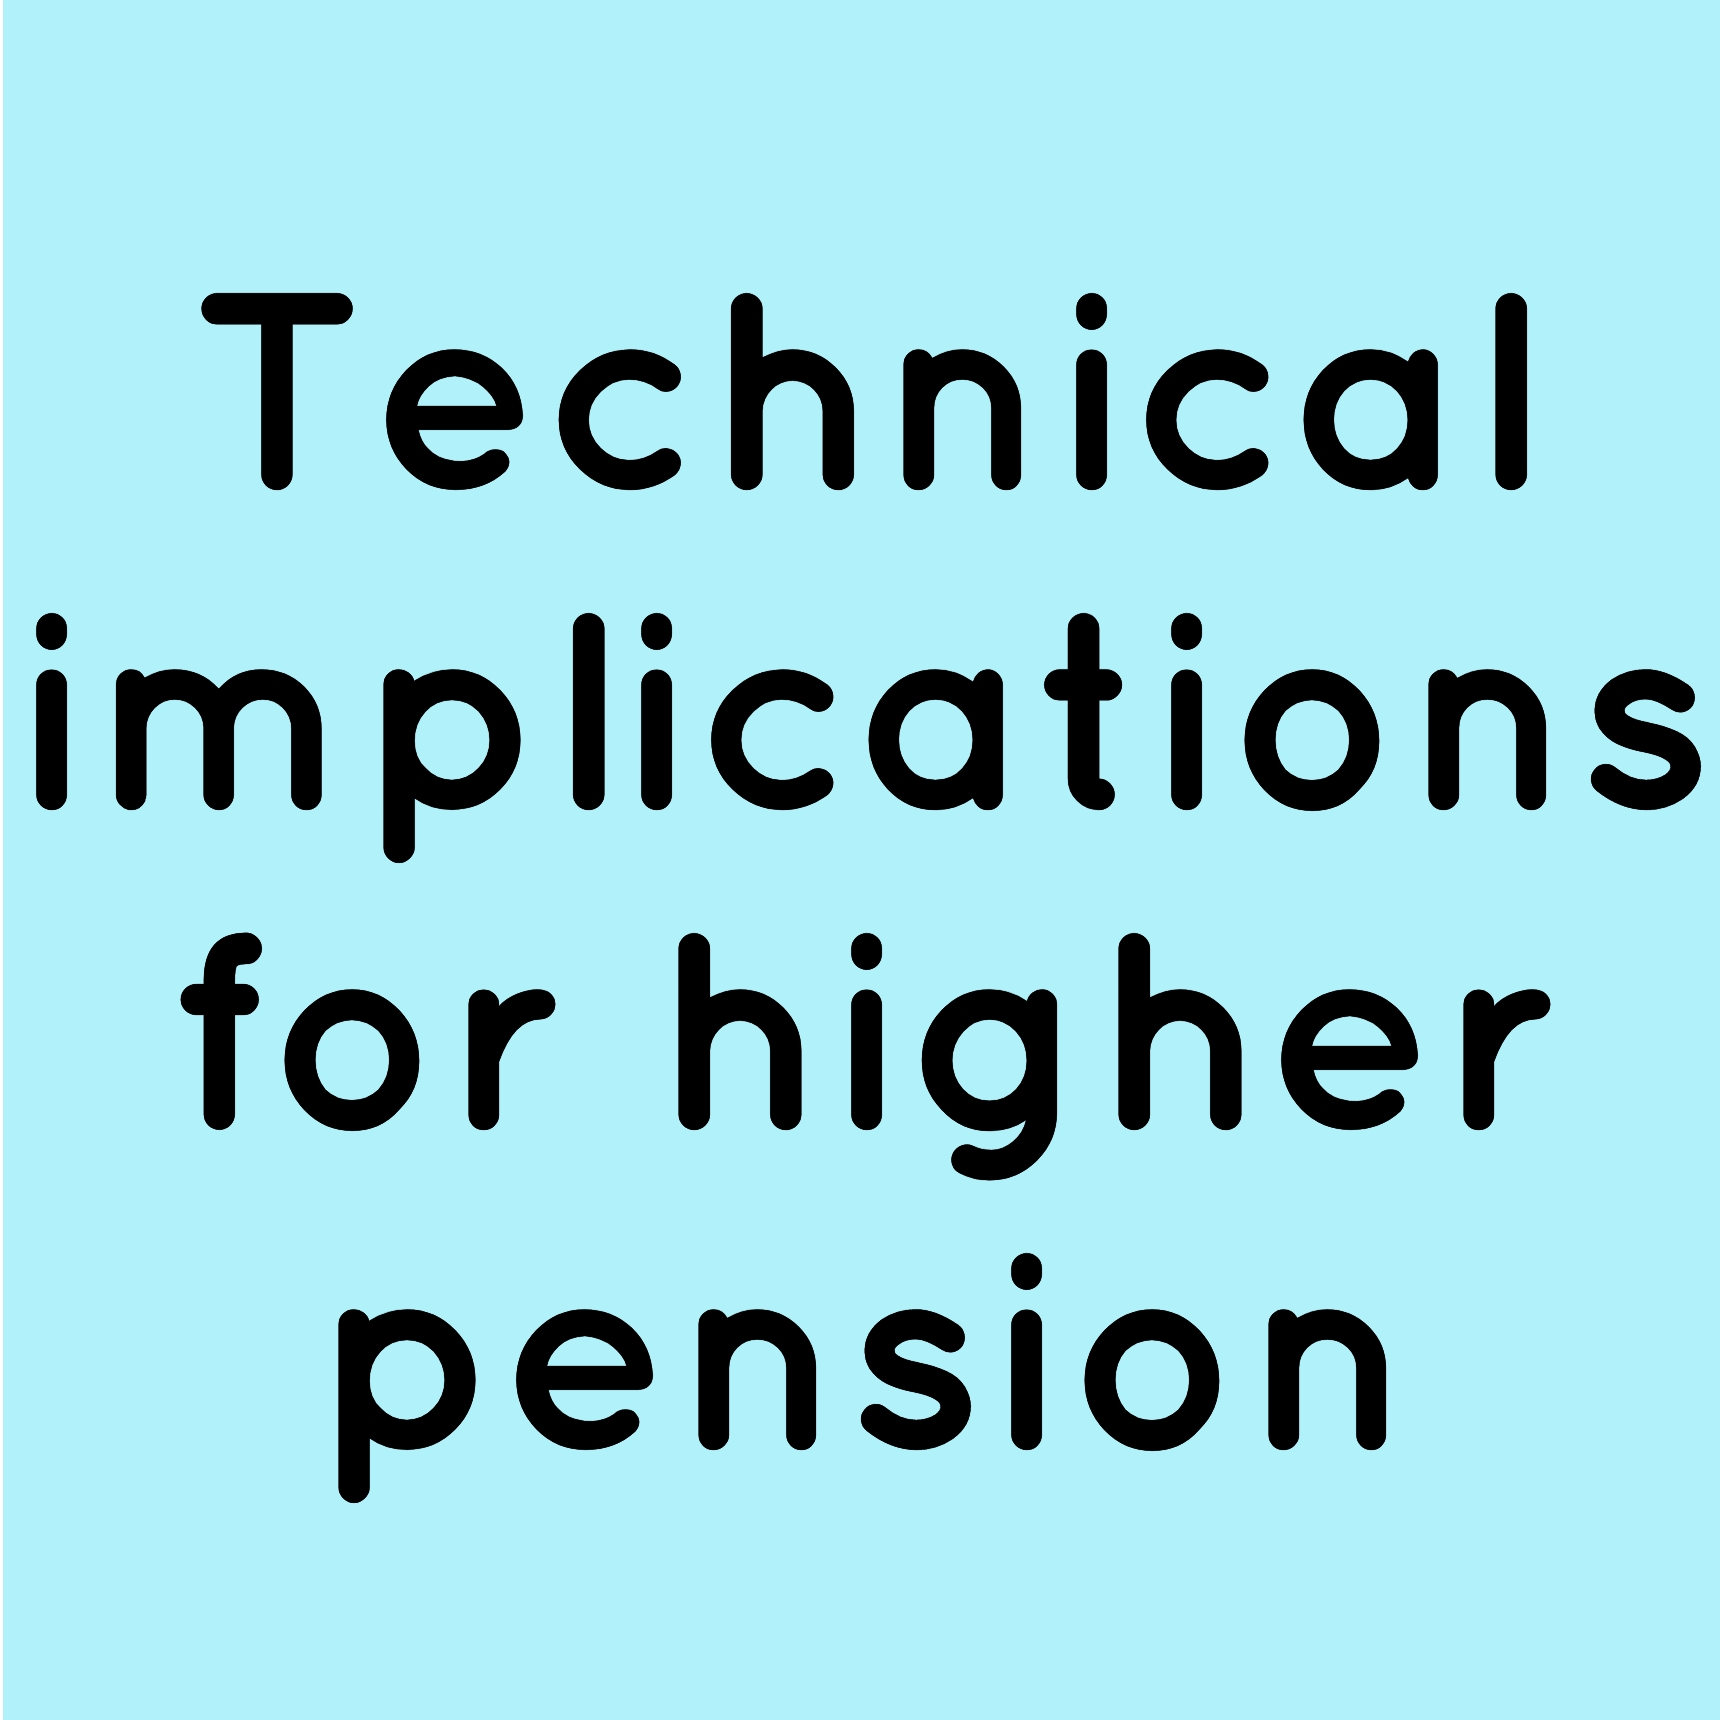 Technical implications for higher pension